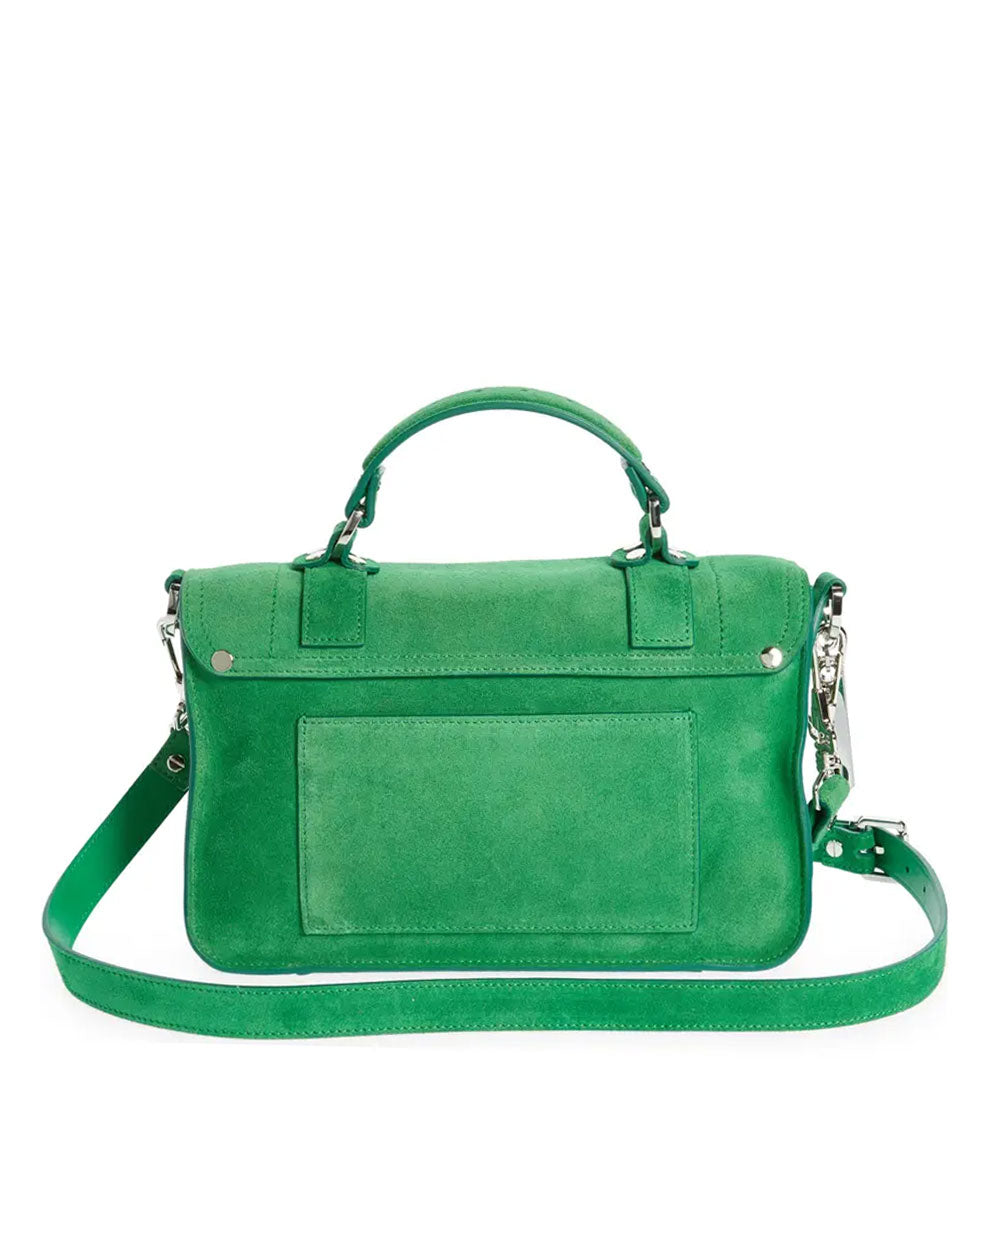 PS1 Tiny Bag in Bottle Green Suede